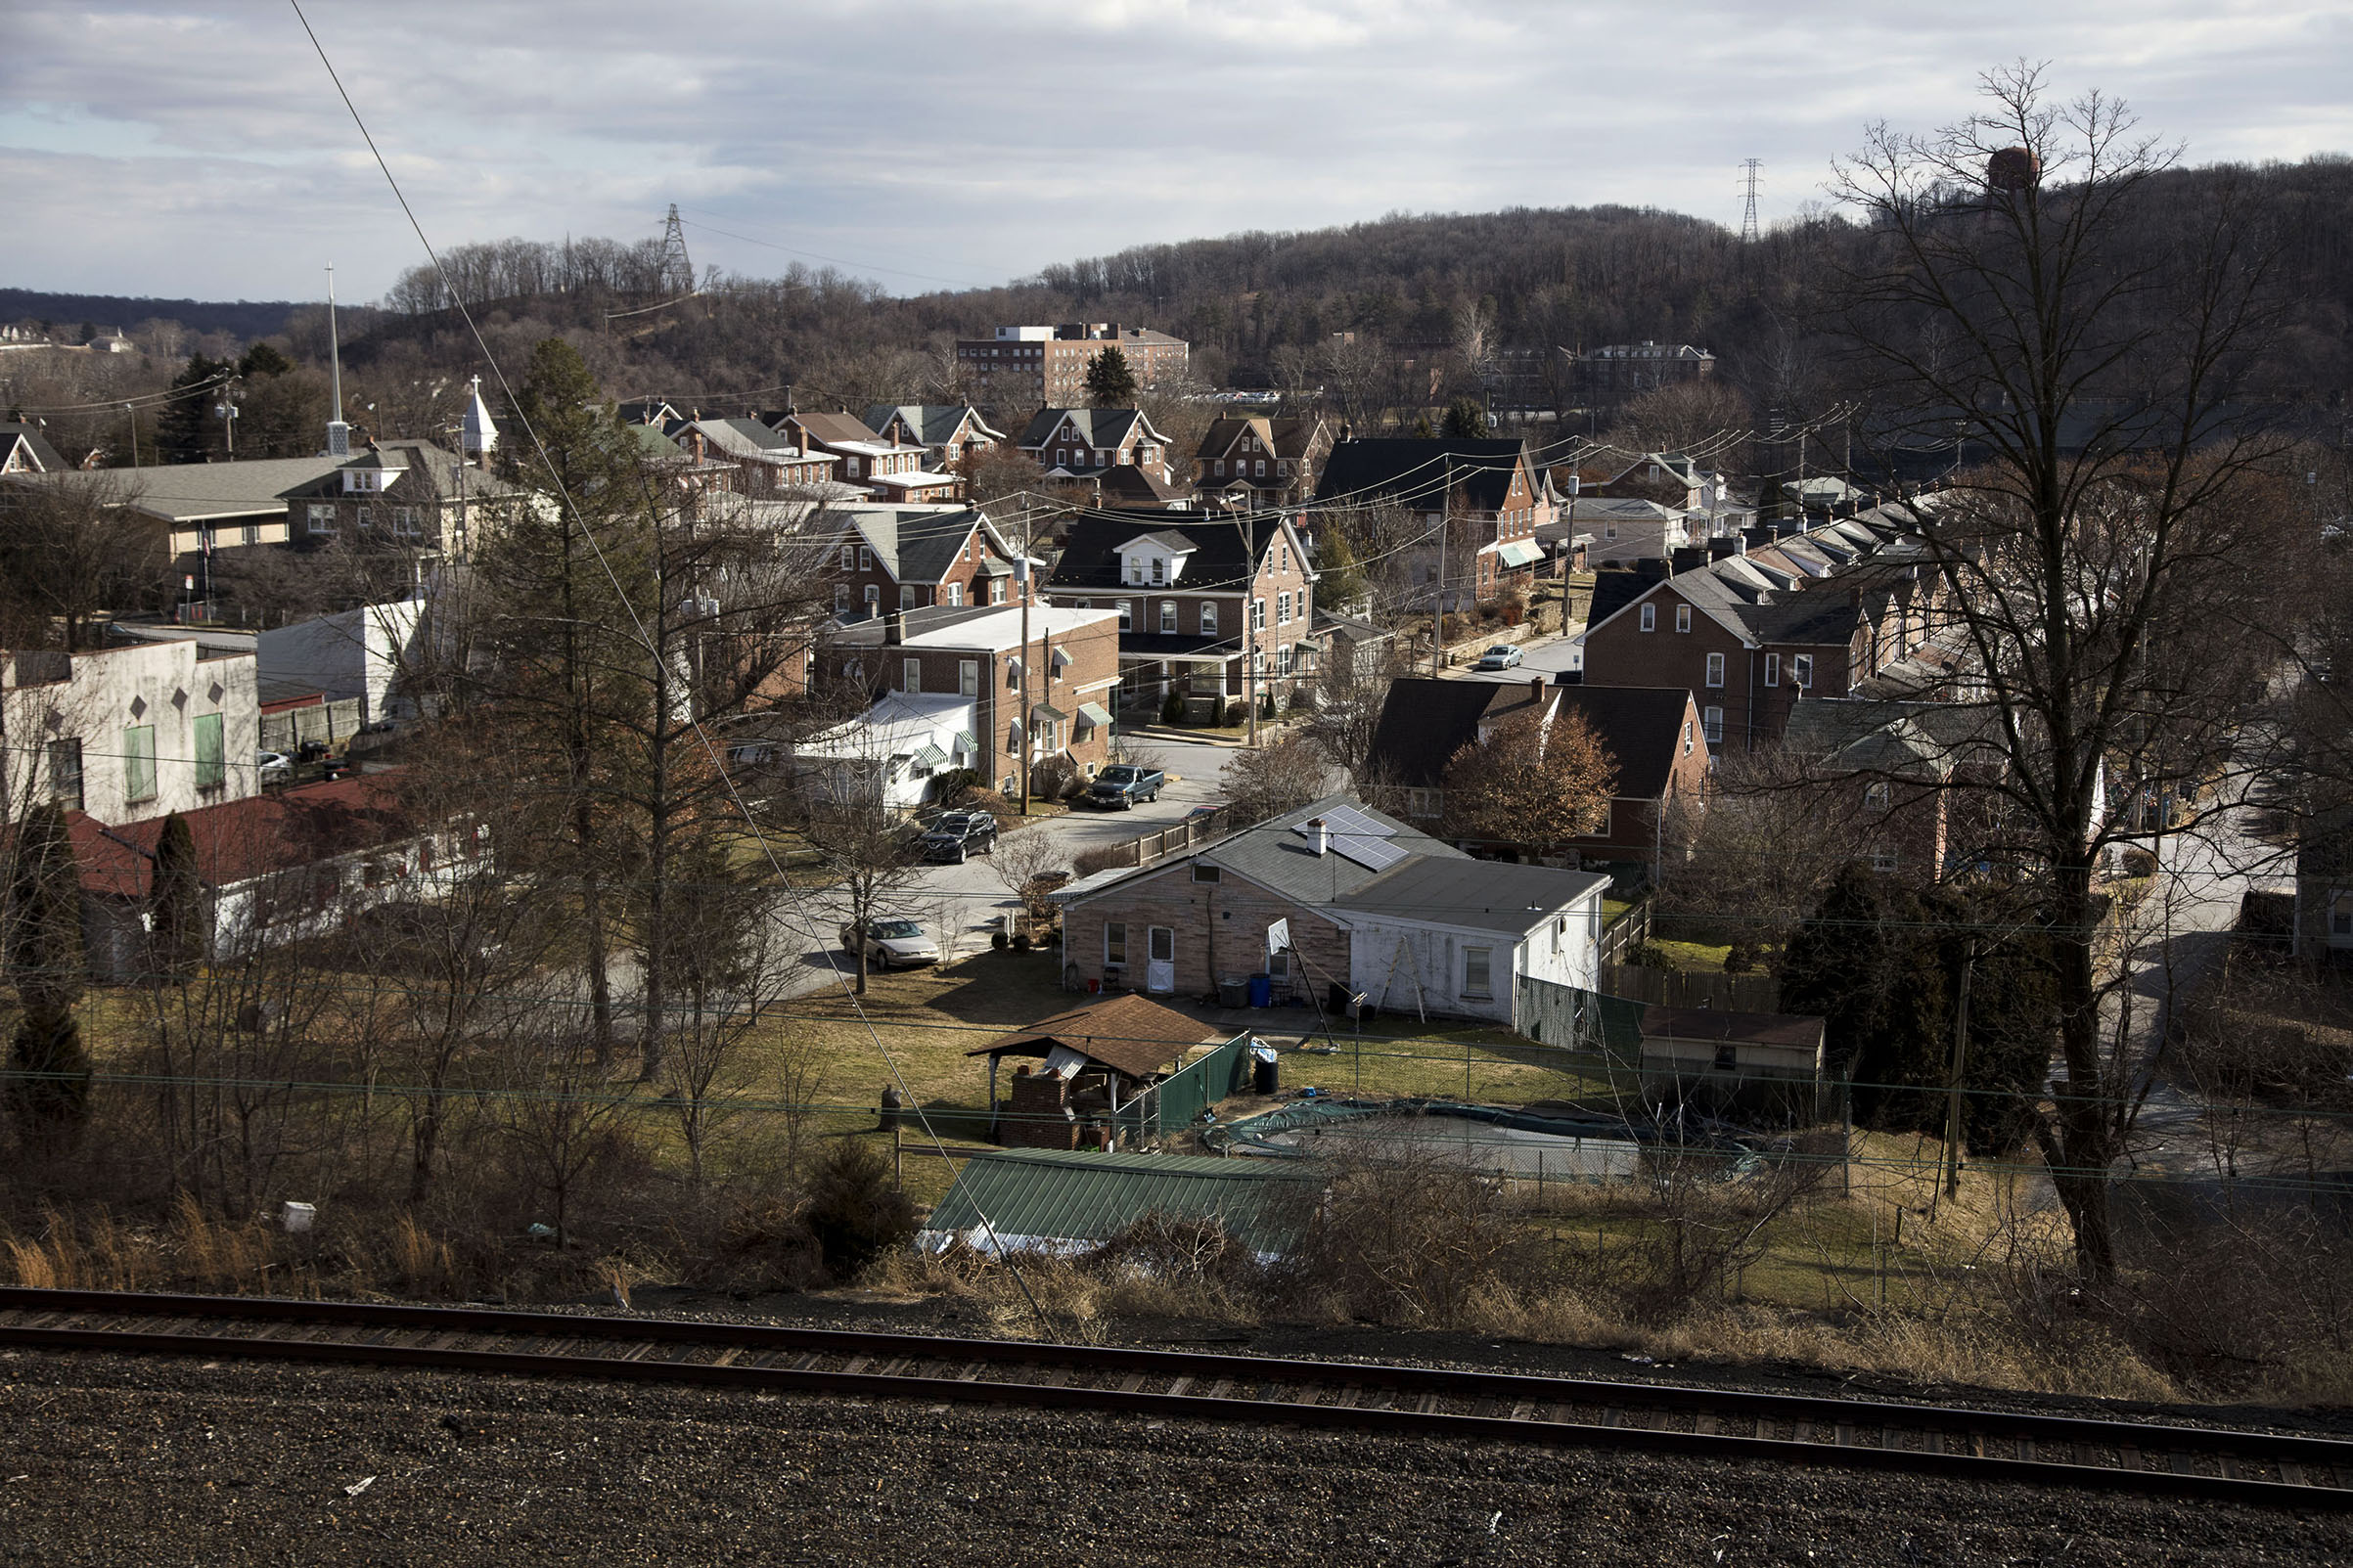 Coatesville was once known as “Pittsburgh East” for its steel production. Today the local steelworkers’ union has just a few hundred workers at the town’s plant (Jeffrey Stockbridge for TIME)